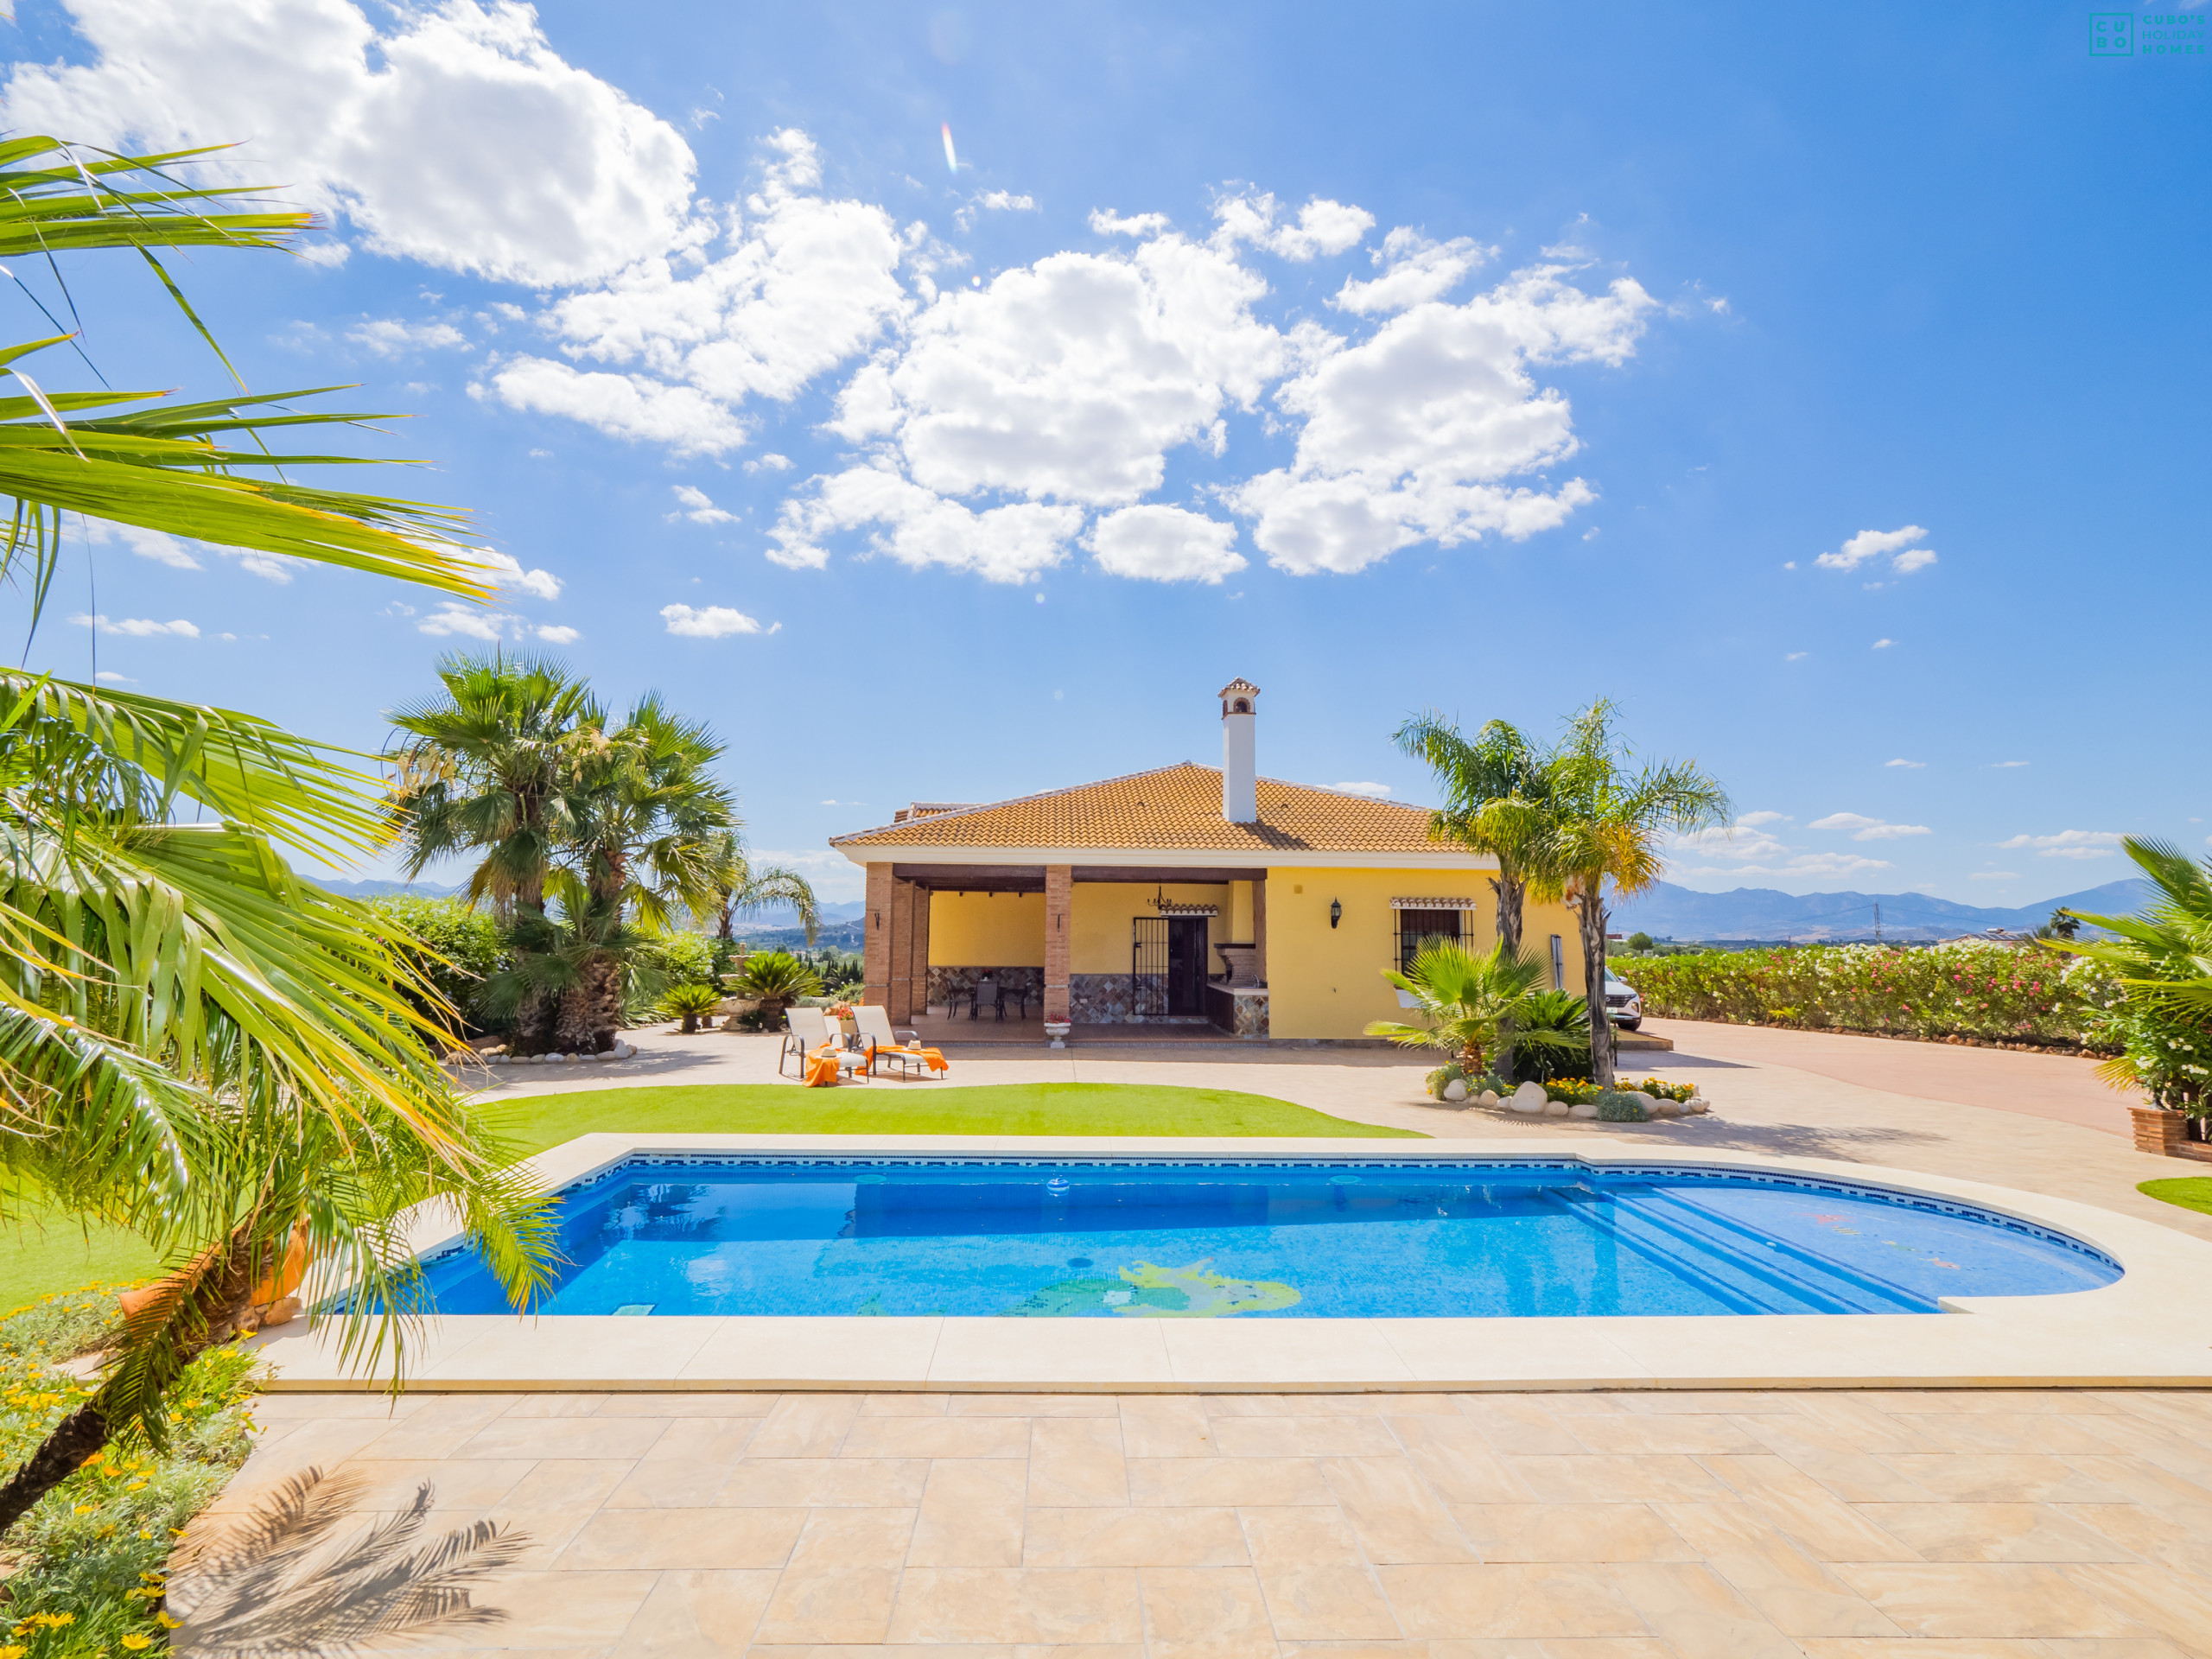 Family accommodation with private pool in Malaga